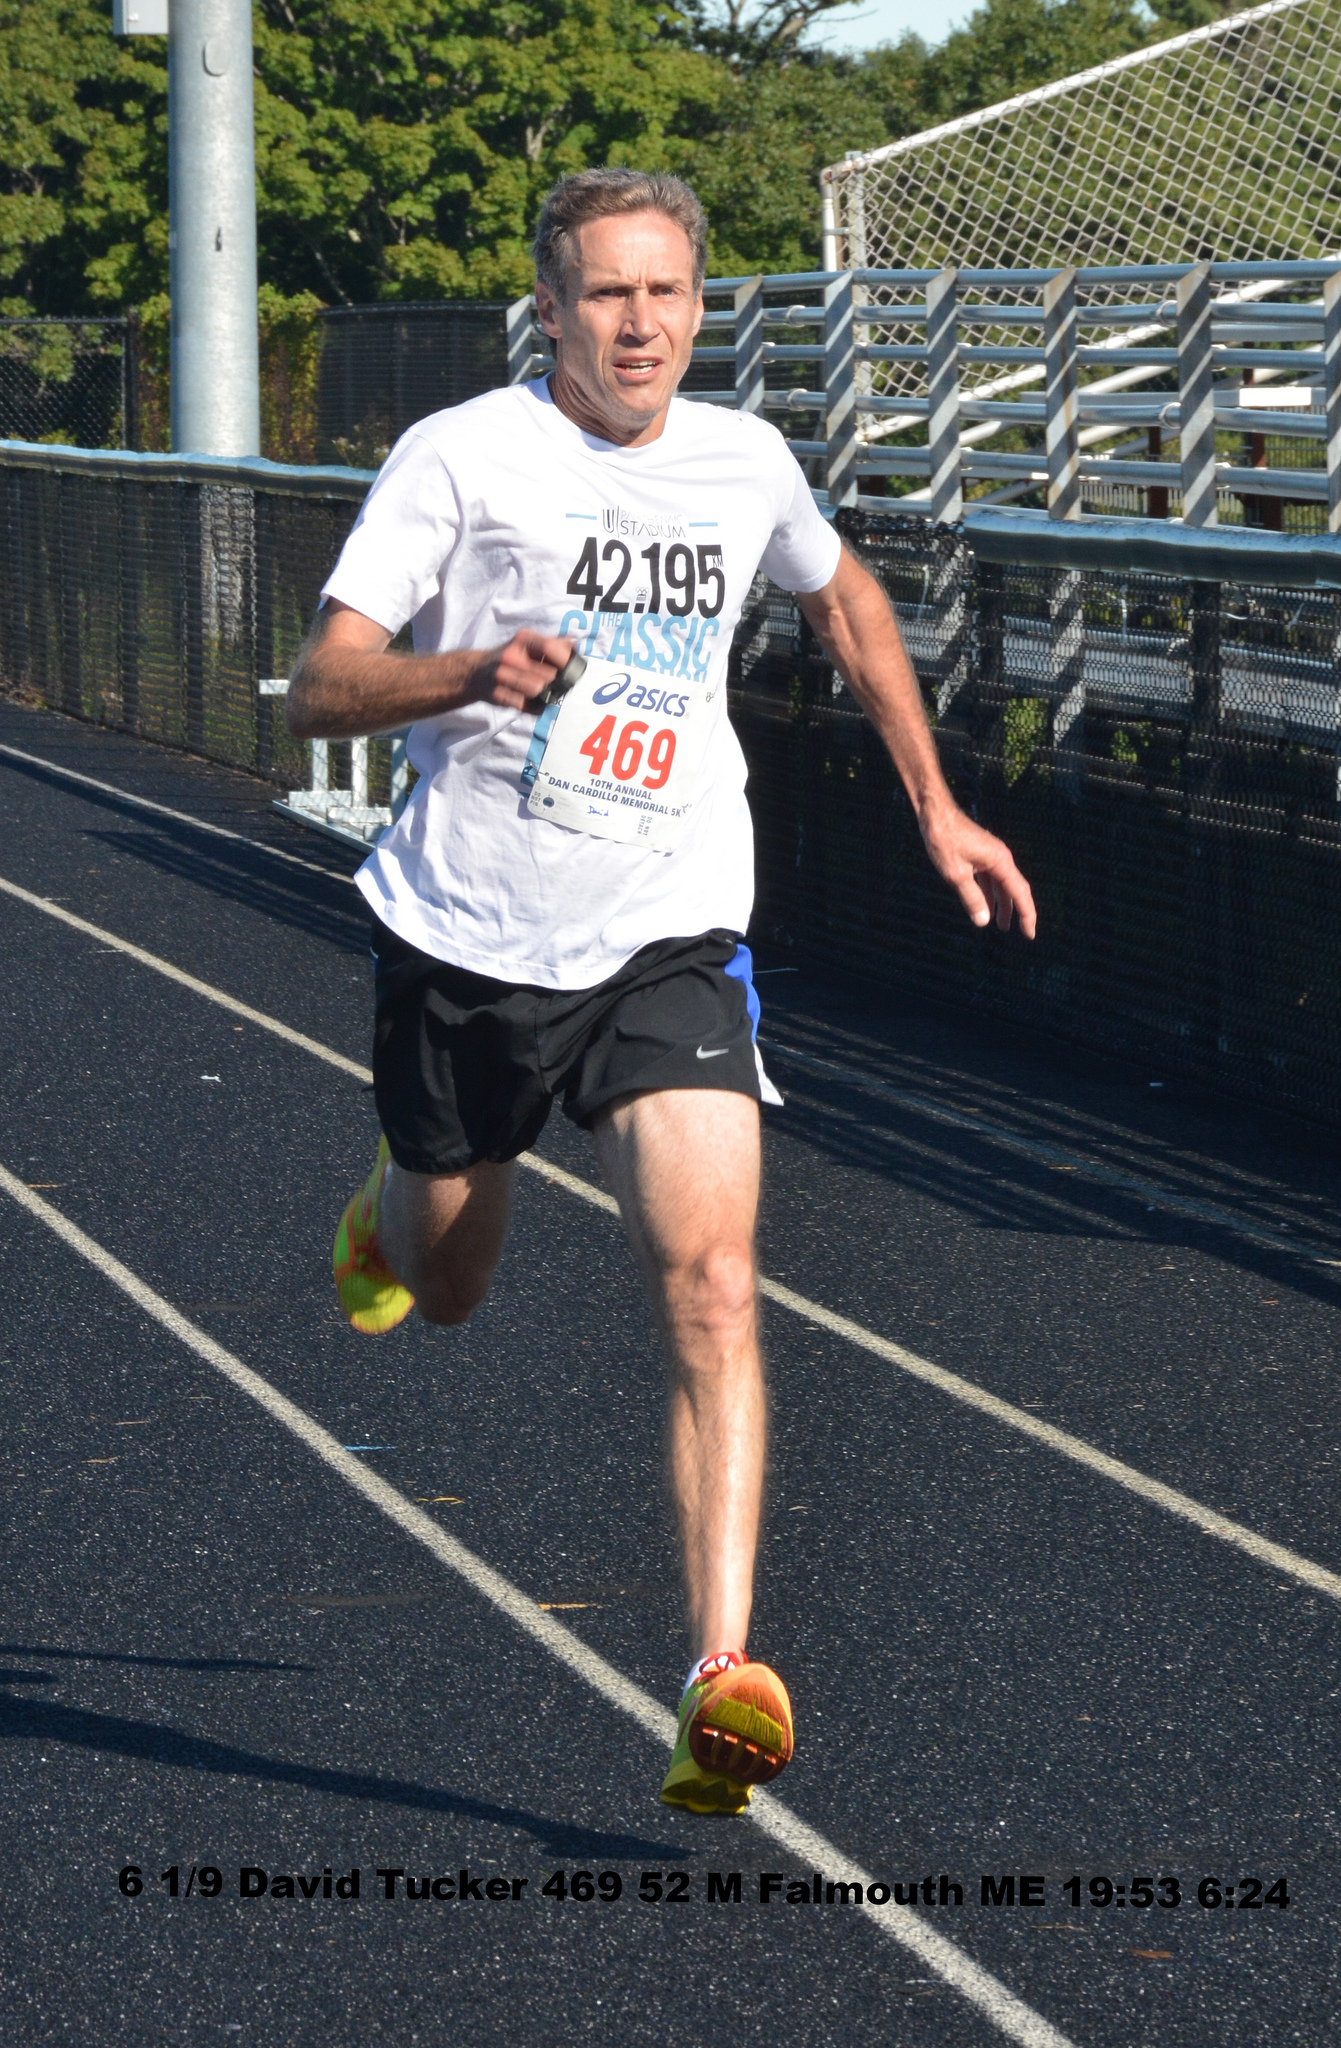 Review Of David Tucker For 2014 Maine Running Photos